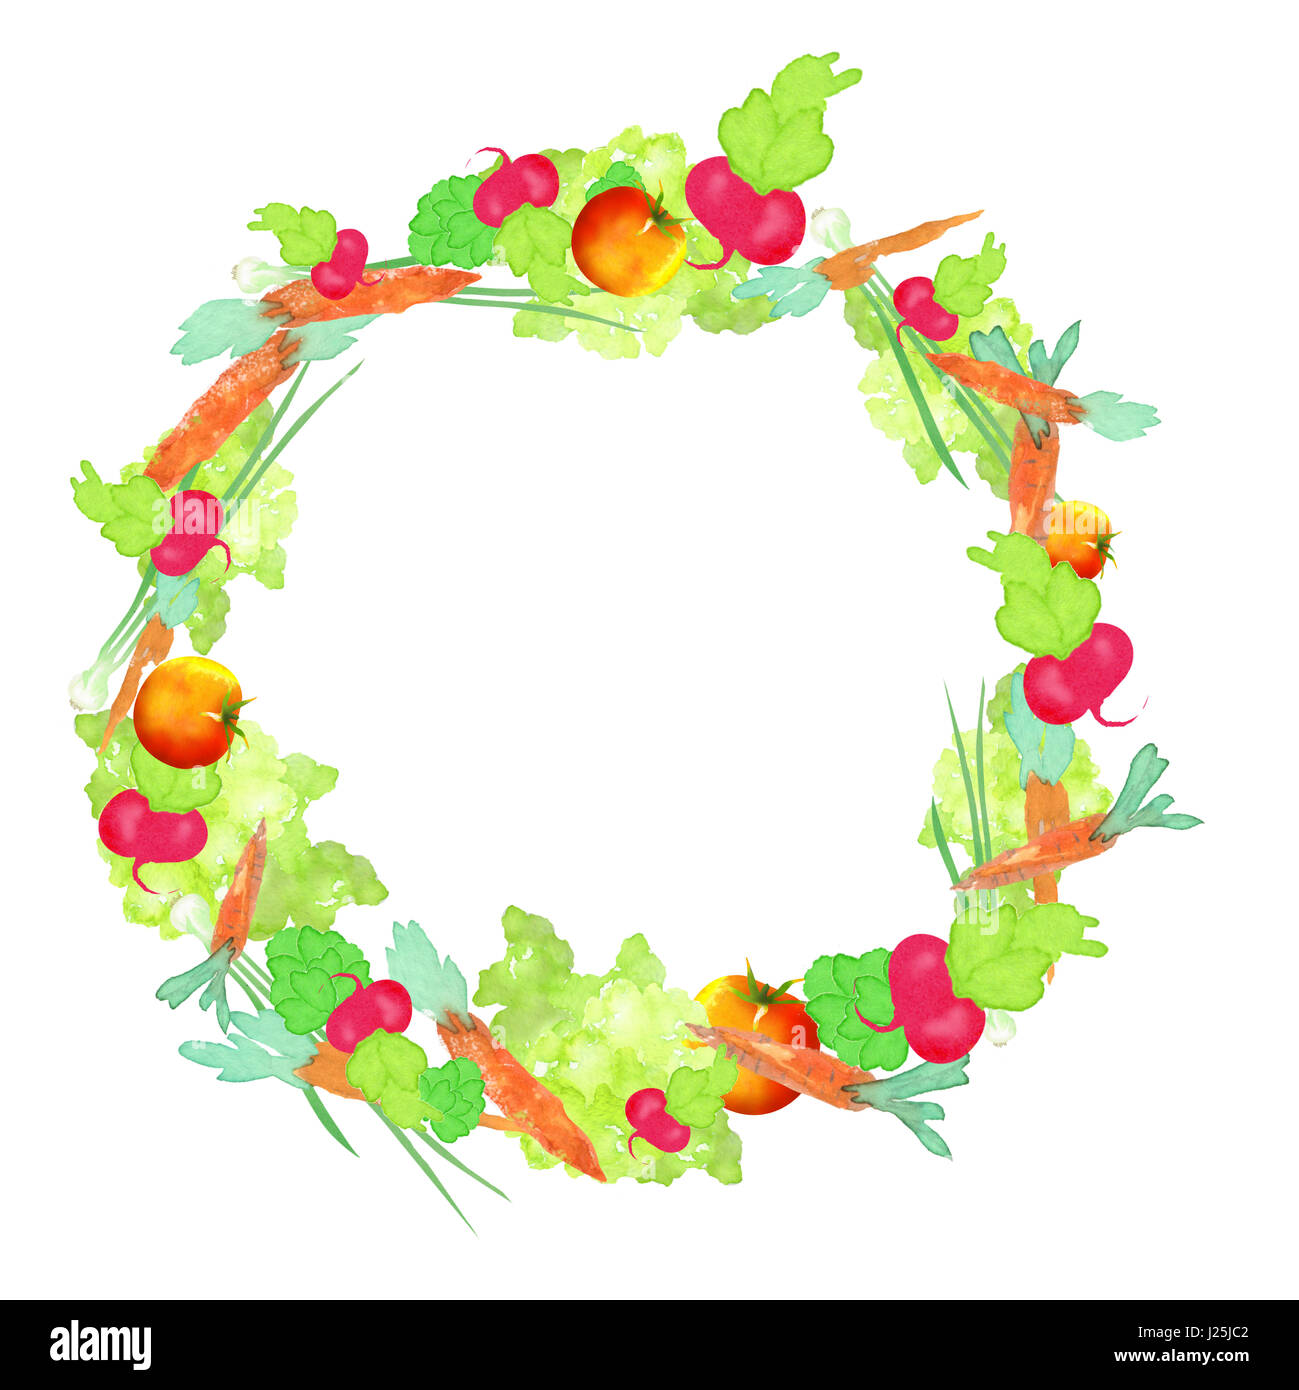 round frame of watercolor vegetables Stock Photo